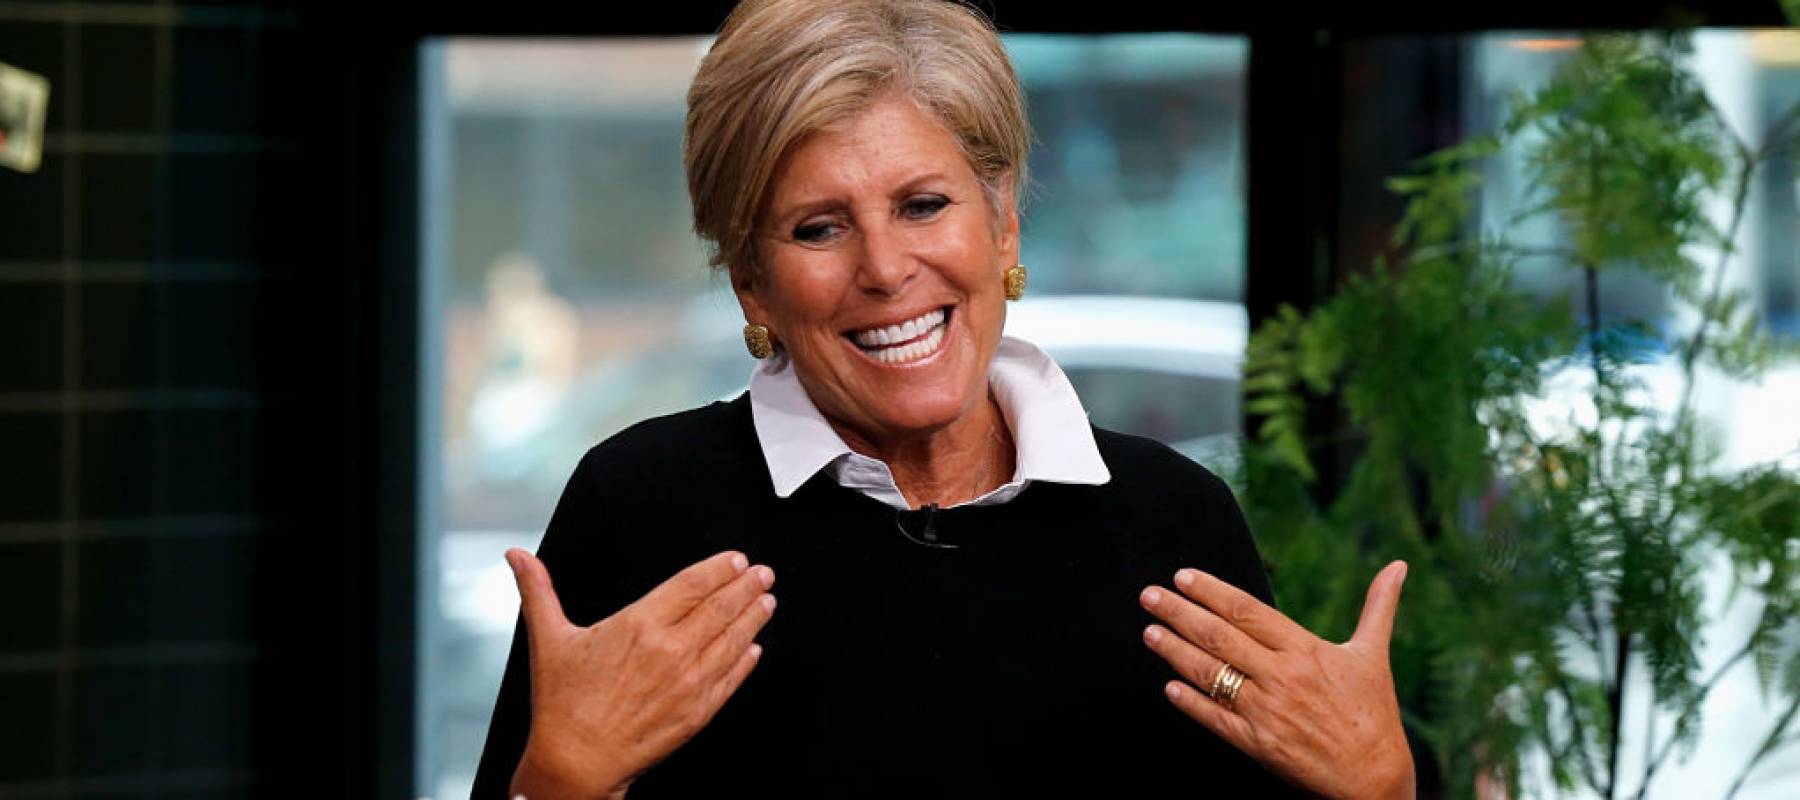 uthor Suze Orman visits Build Brunch to discuss her Book &quot;Women &amp; Money&quot; at Build Studio on September 17, 2018 in New York City